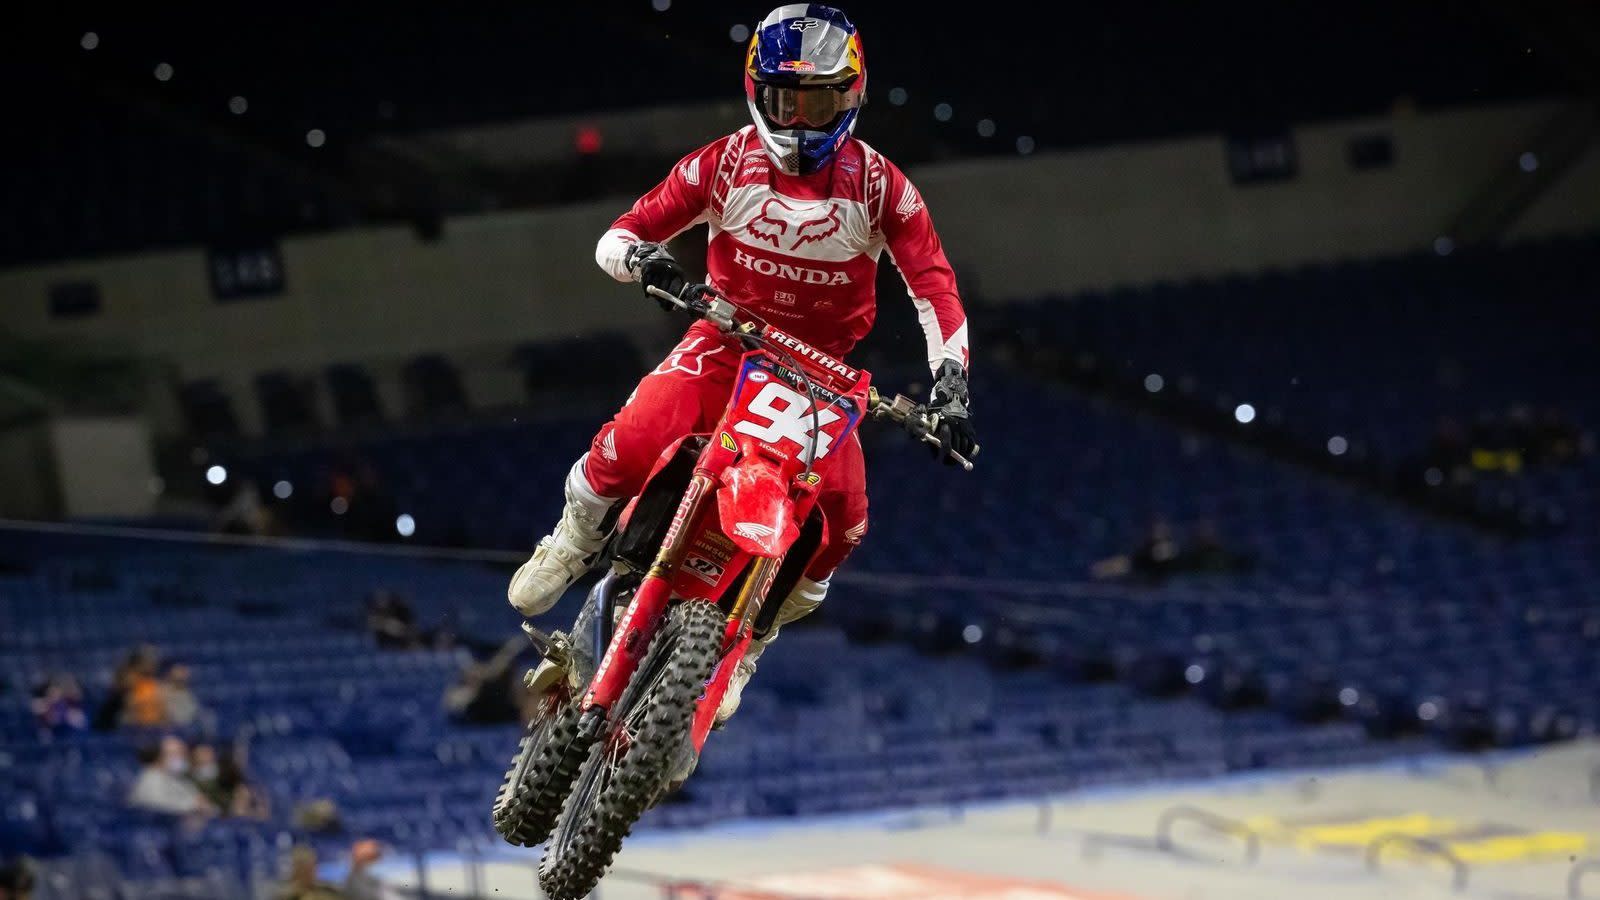 Ken Roczen Wins Supercross Round 5 In Indy Back To Back For First Time Since 2017 Injury